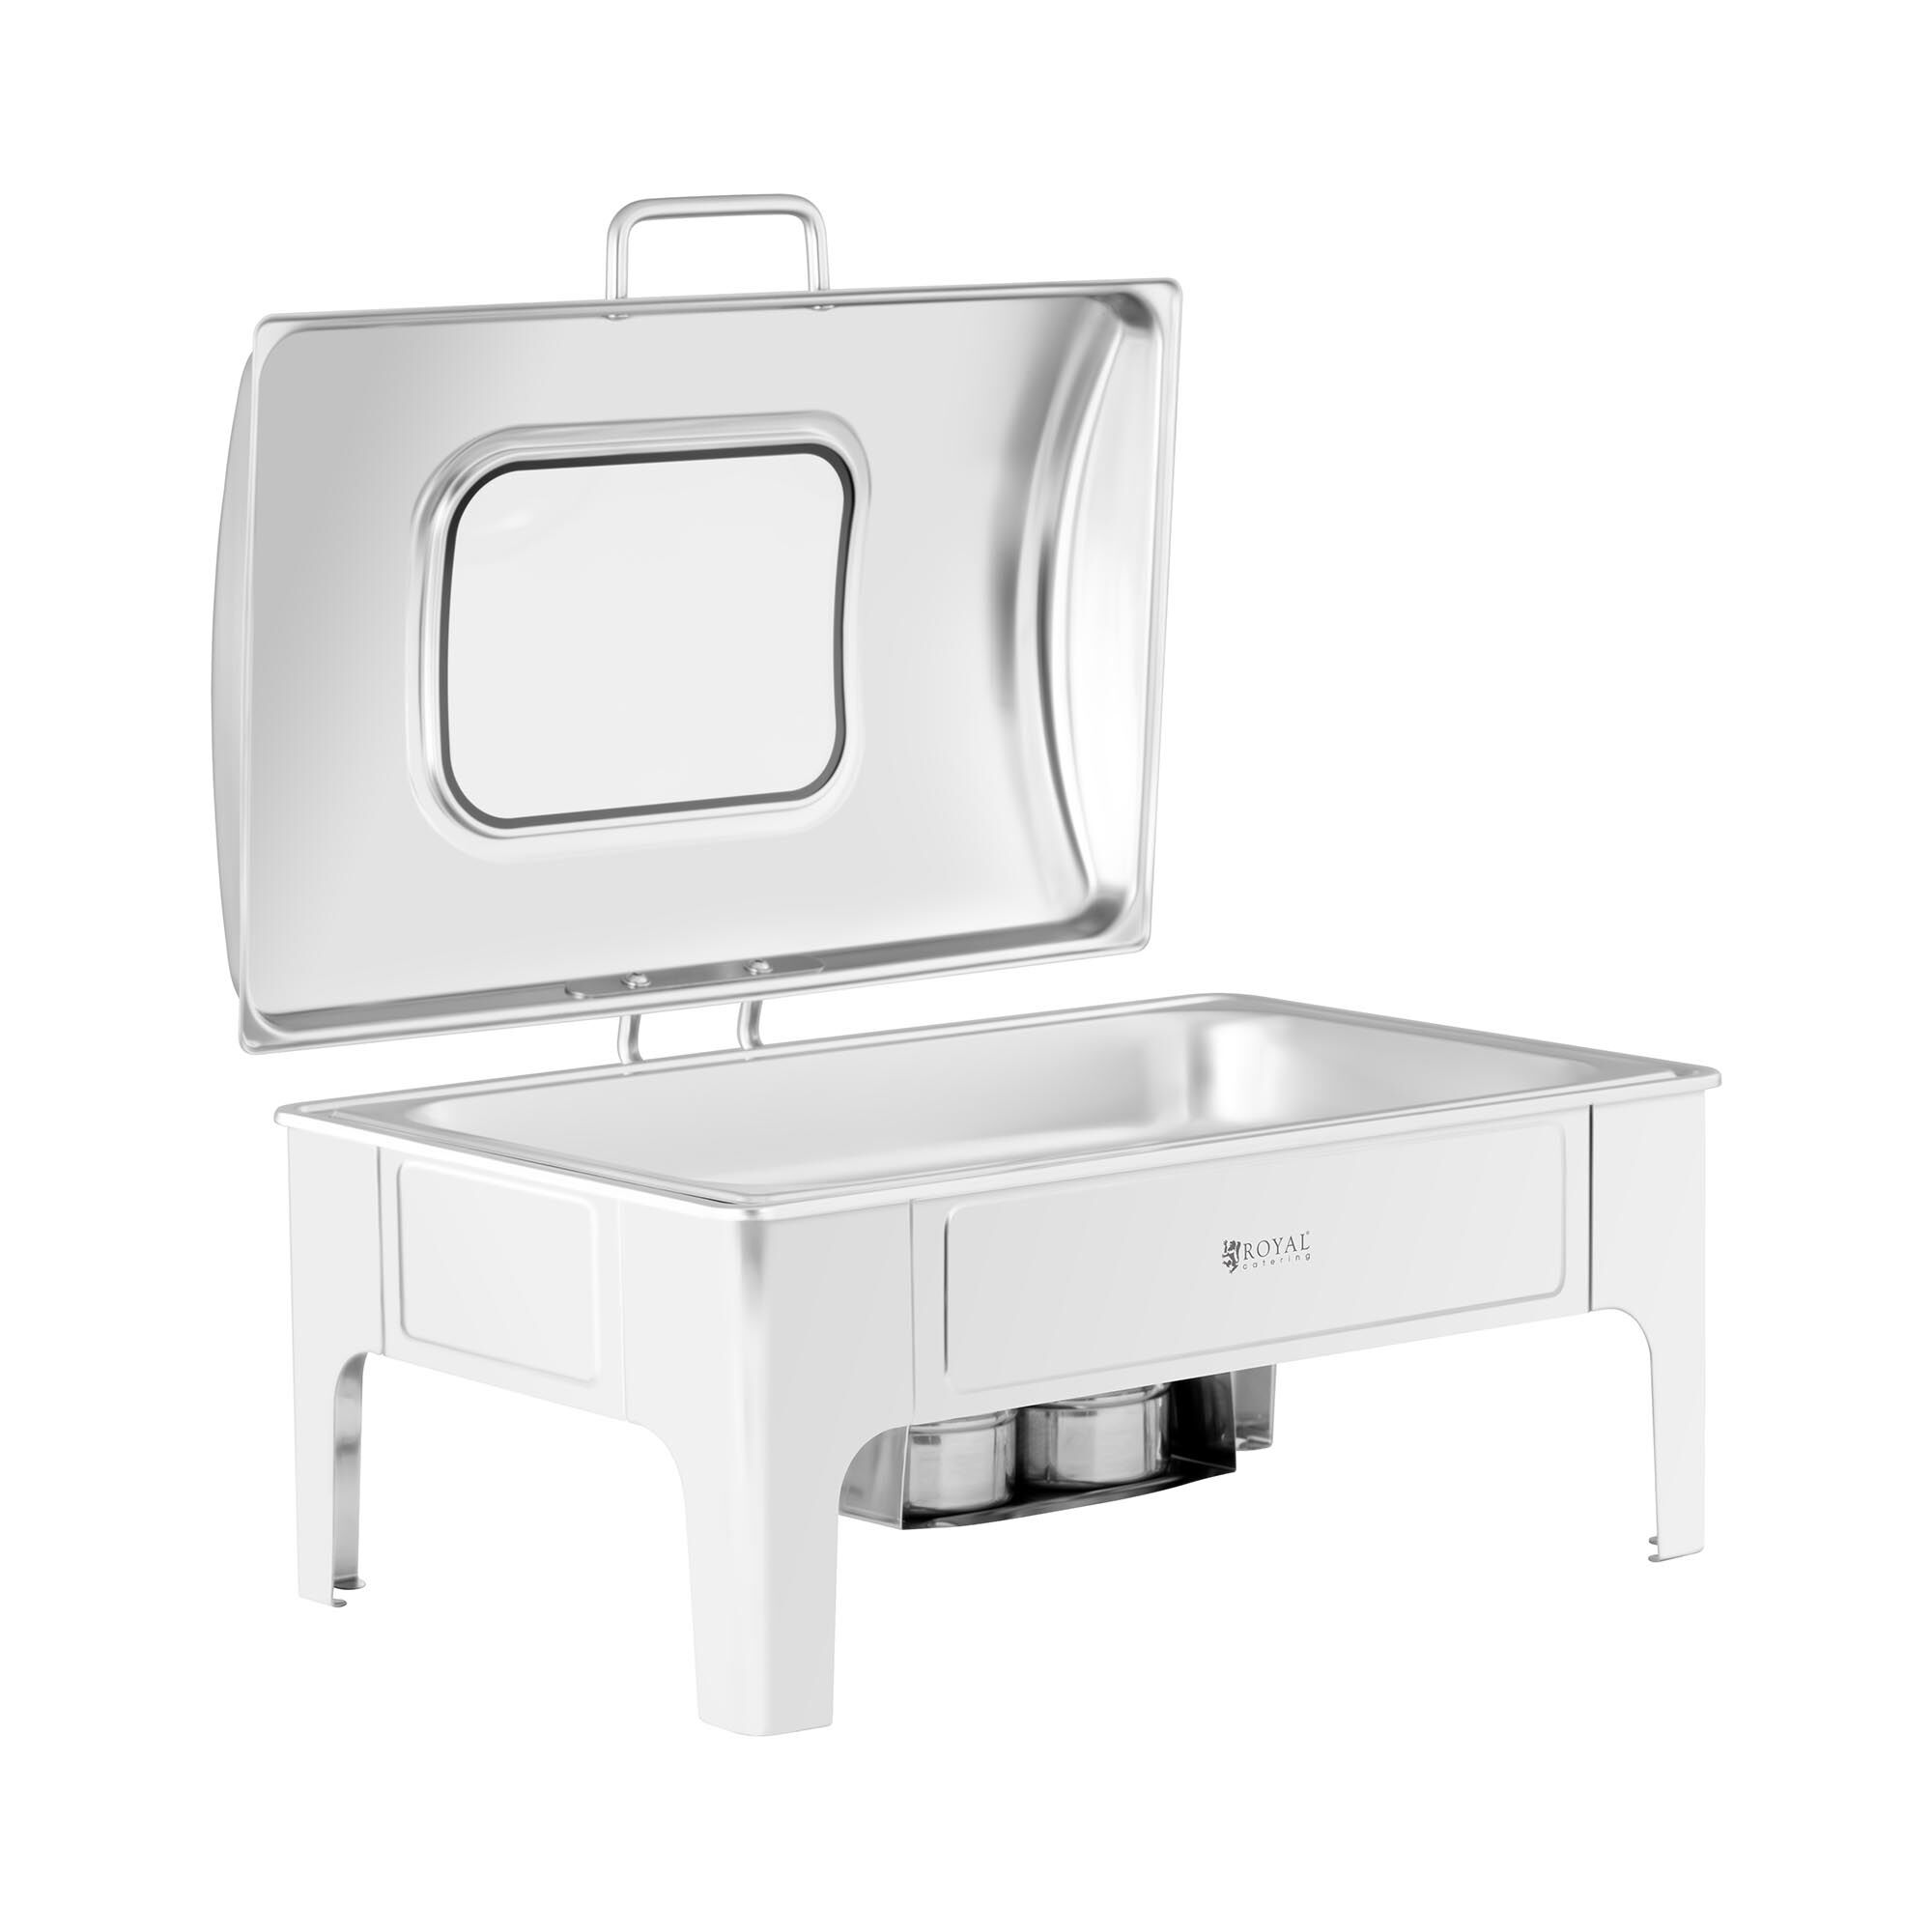 Royal Catering Chafing Dish - GN 1/1 - Royal Catering - 8.5 L - 2 fuel cells - viewing window